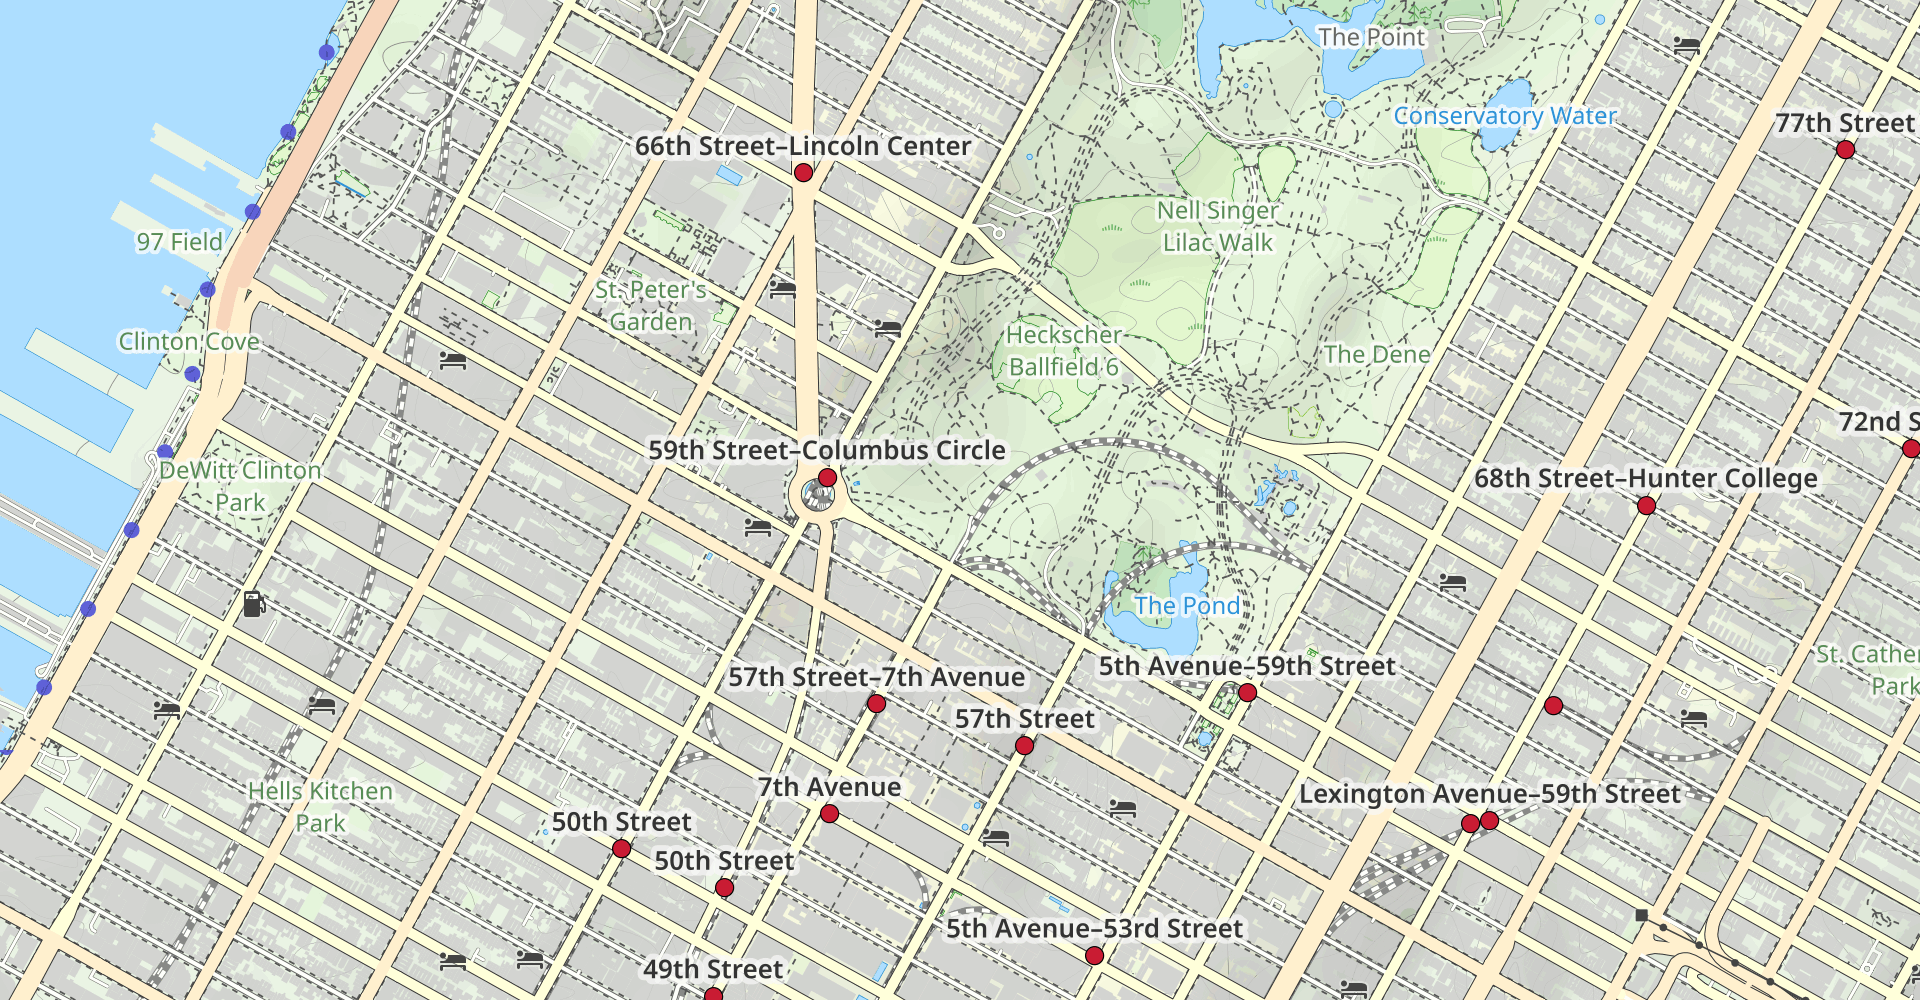 Central Park: East and West Drive Loop